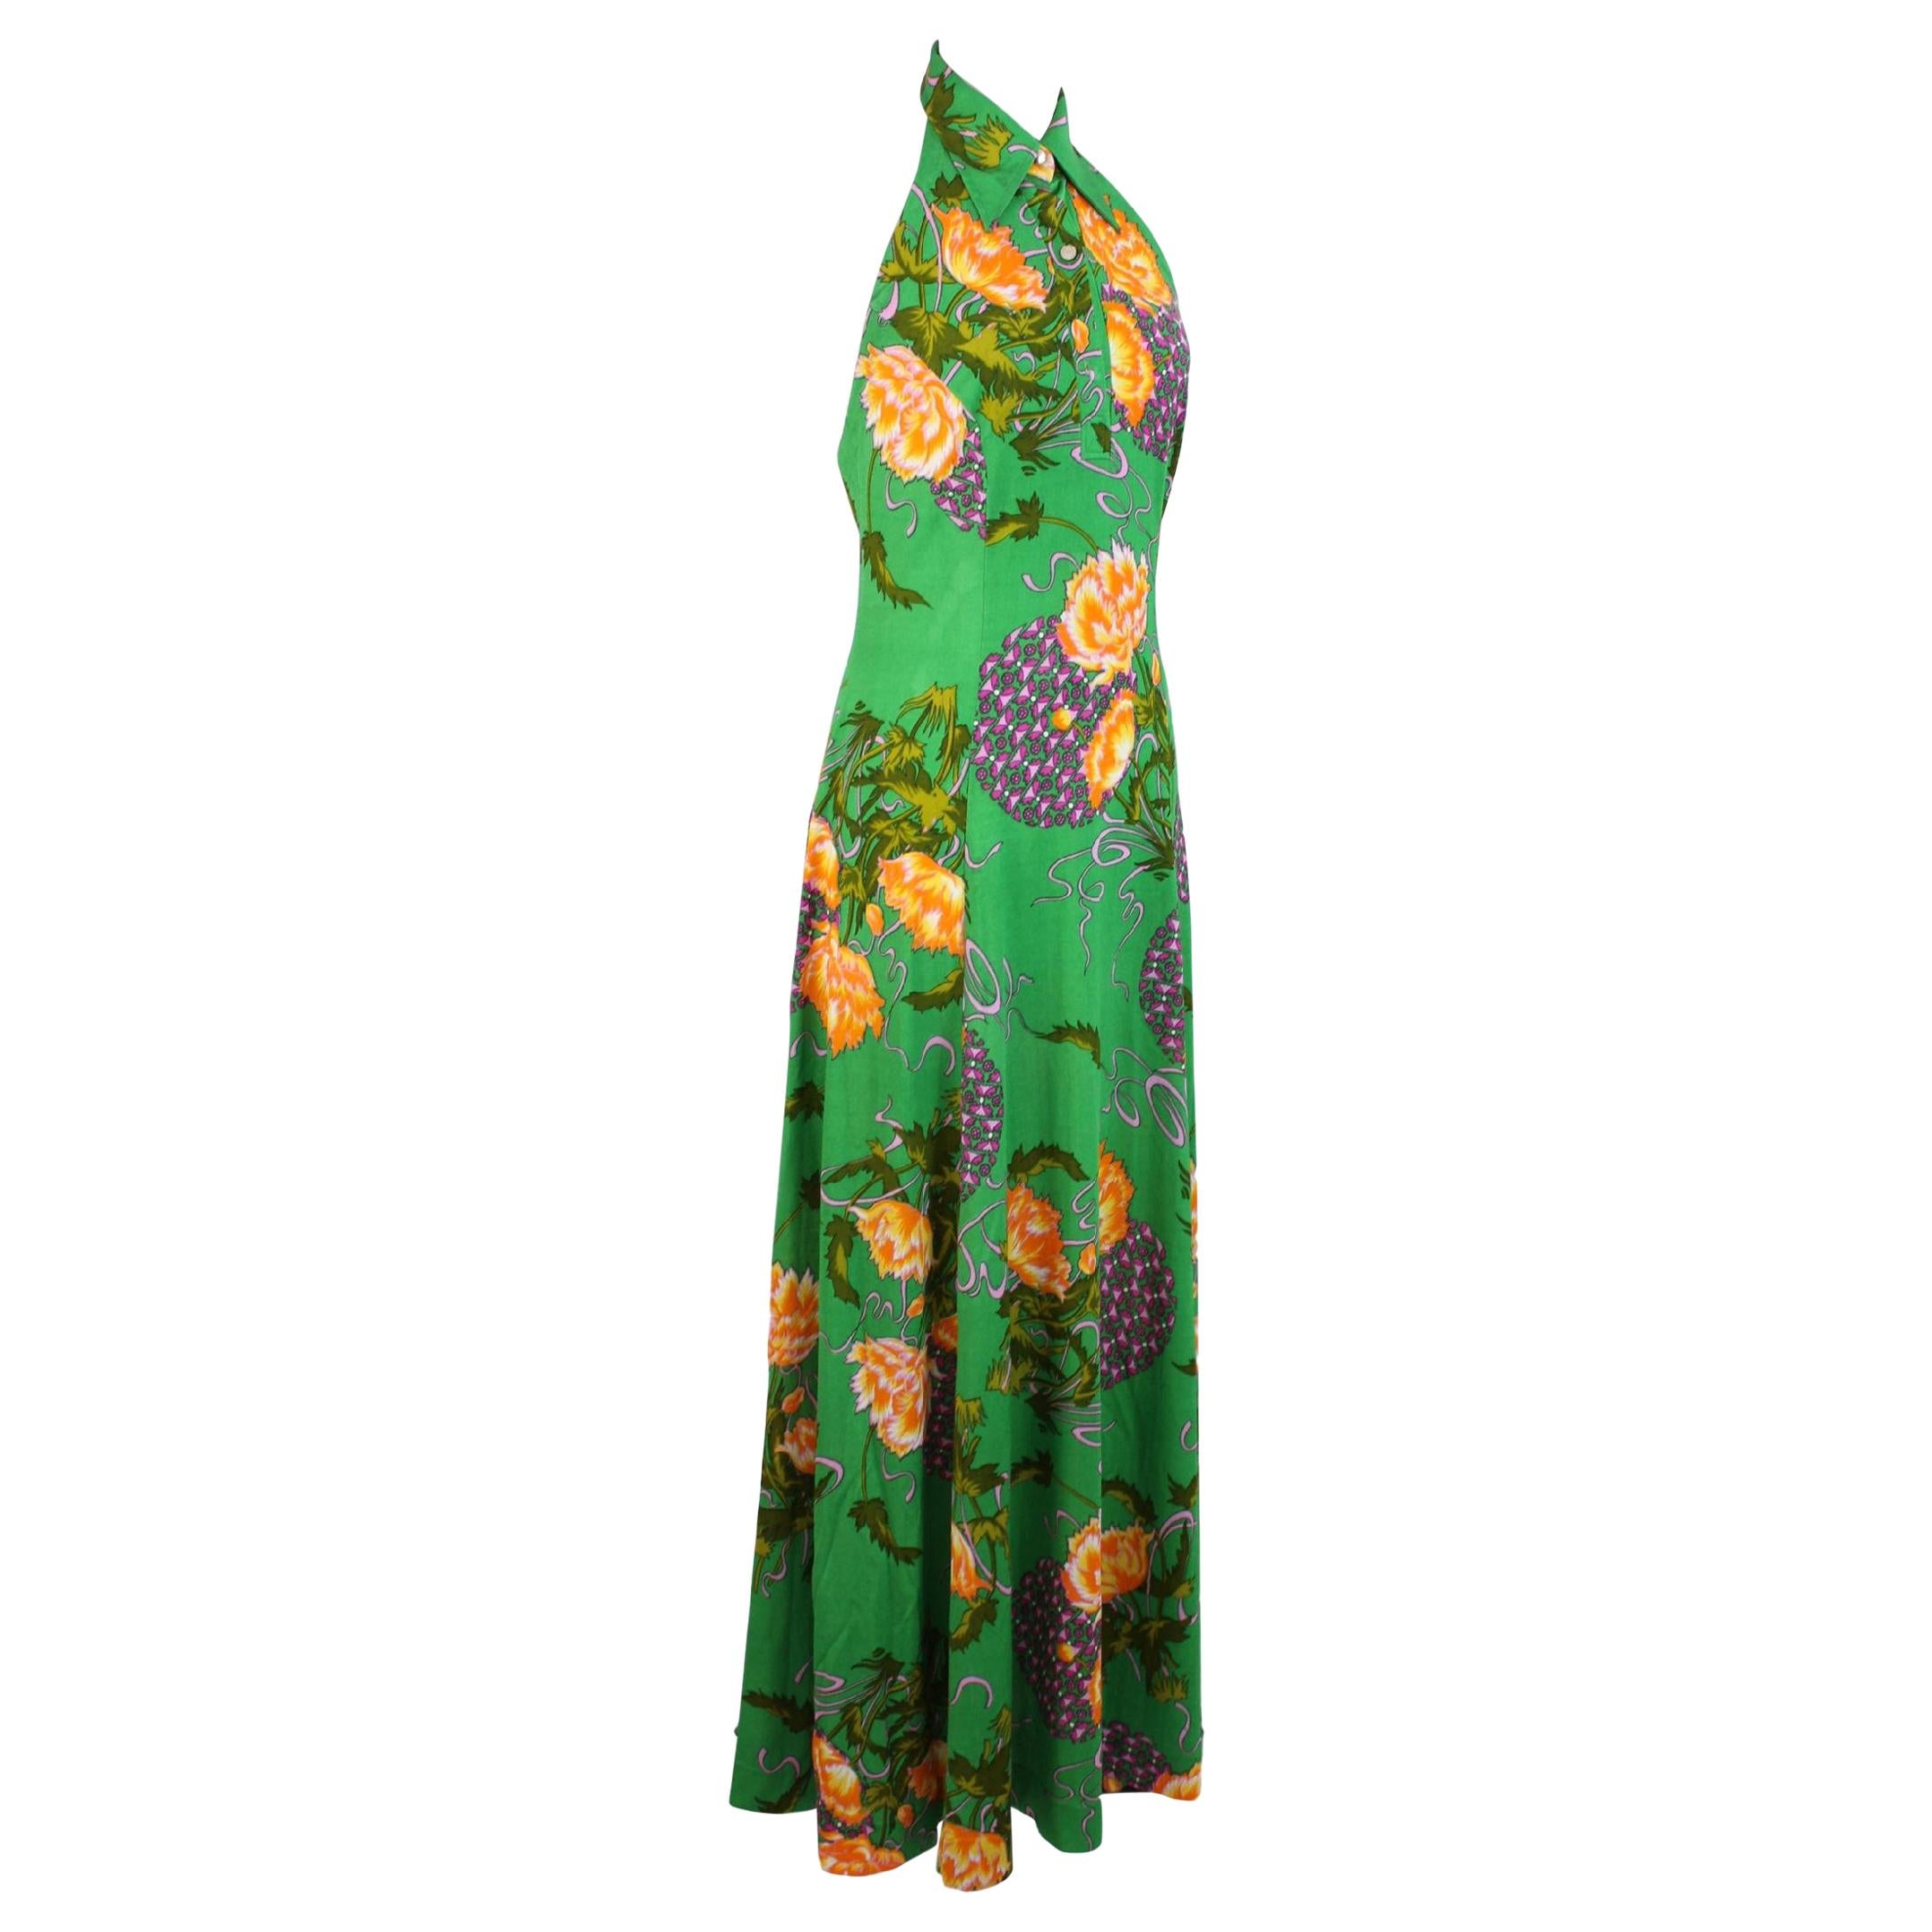 Vintage Floral Party Cocktail American Neckline Long Green Handmade Dress 1980s